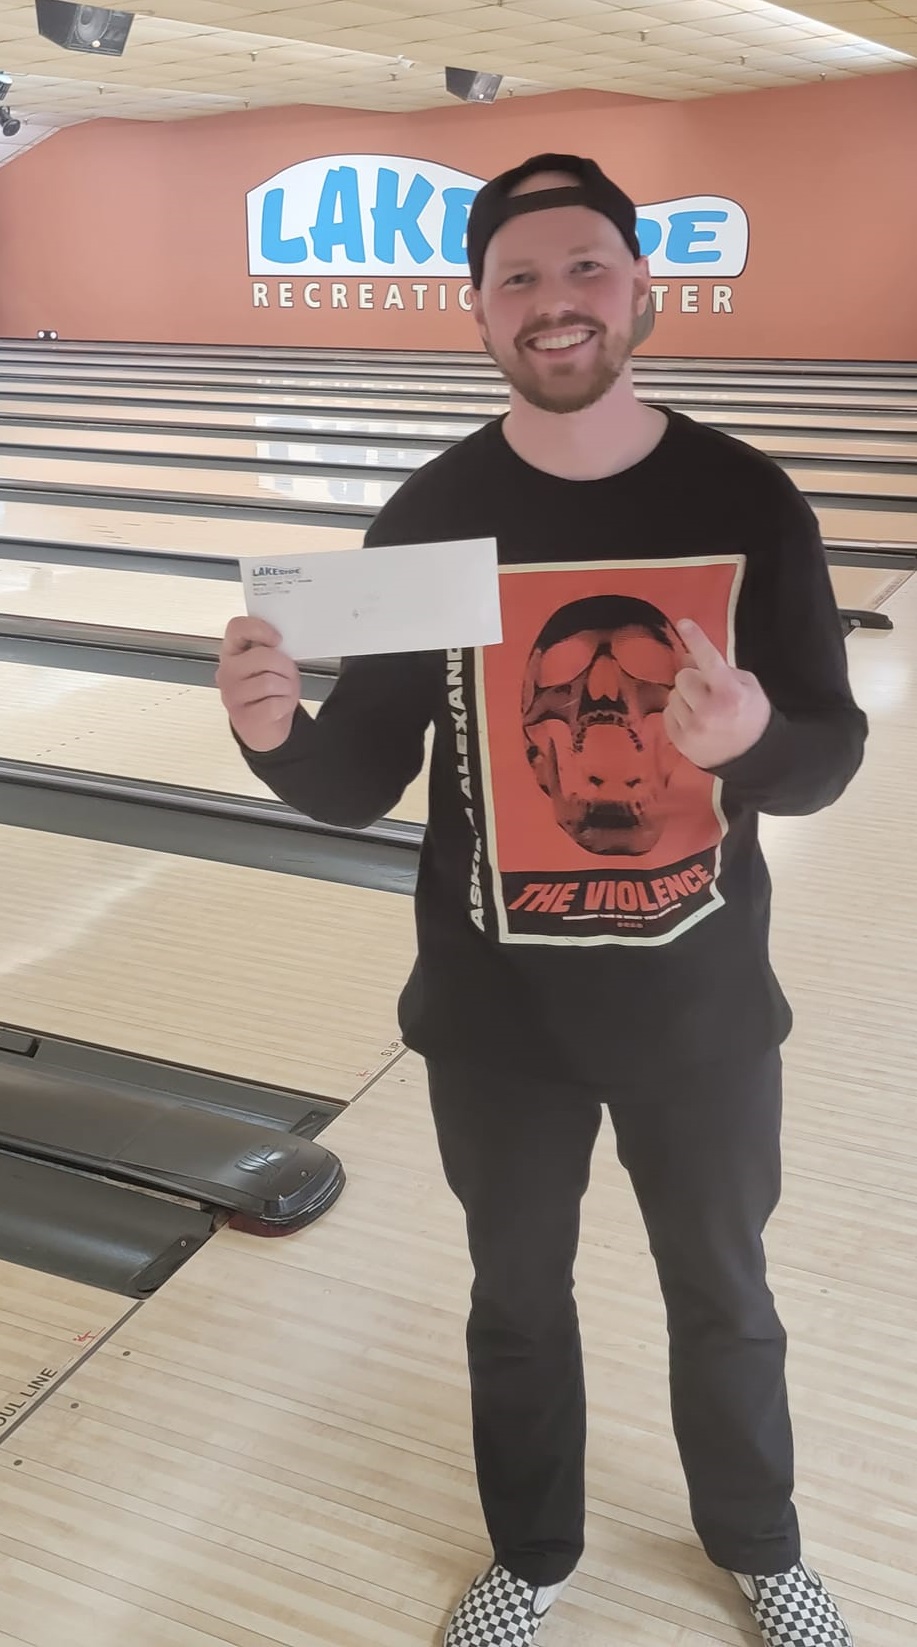 Congratulations Sam Ives on winning our Handicap Eliminator at Lakeside Recreation Center!